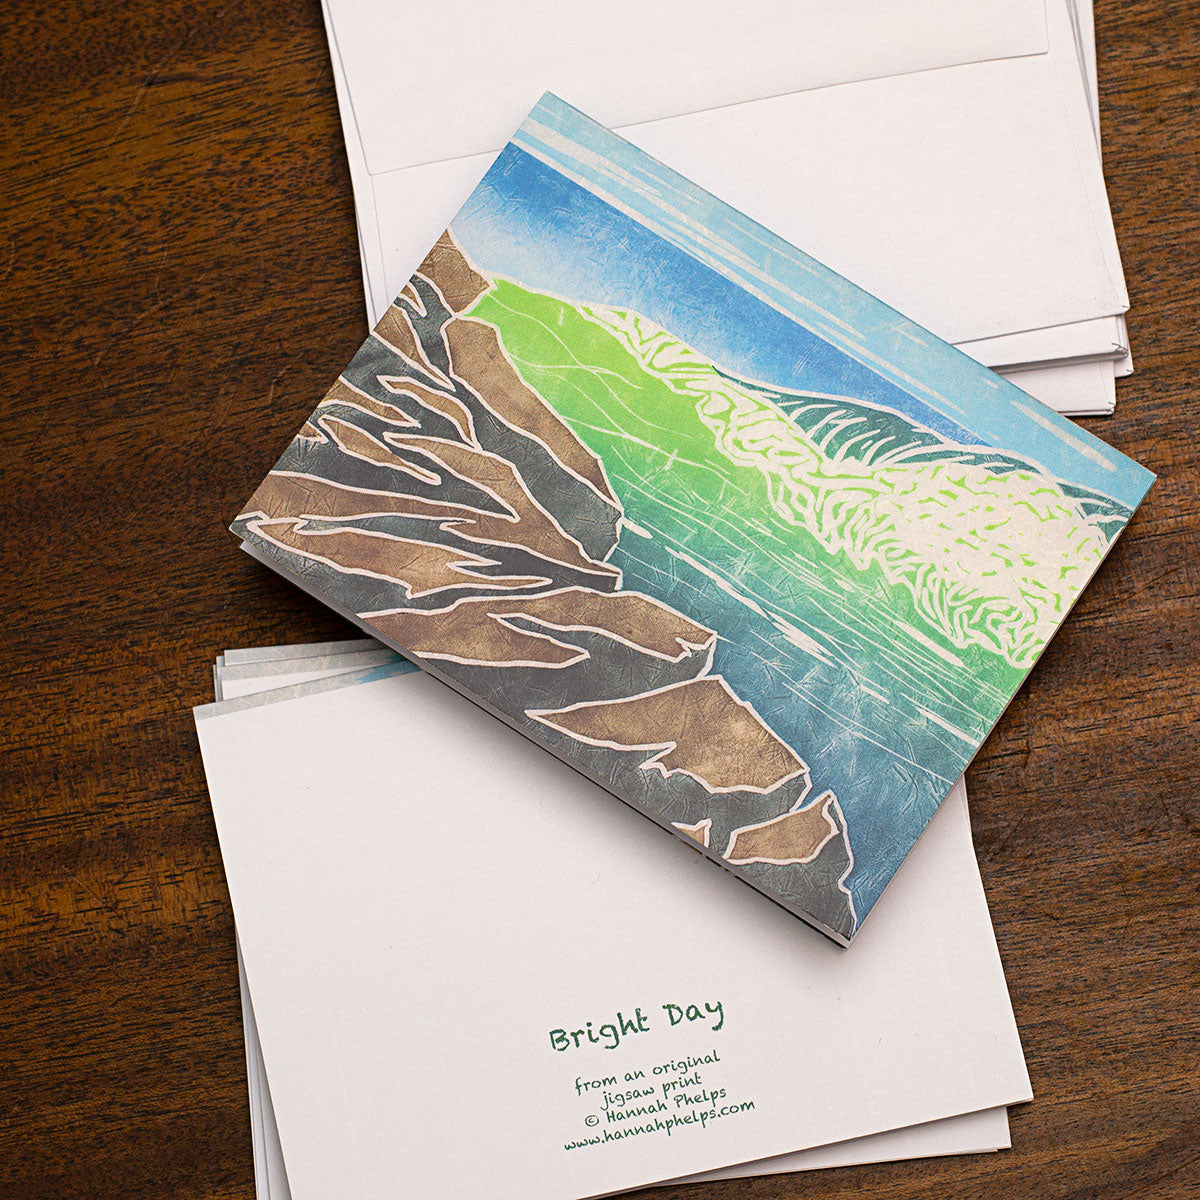 A2 size note cards with a handmade print by New Hampshire artist, Hannah Phelps.